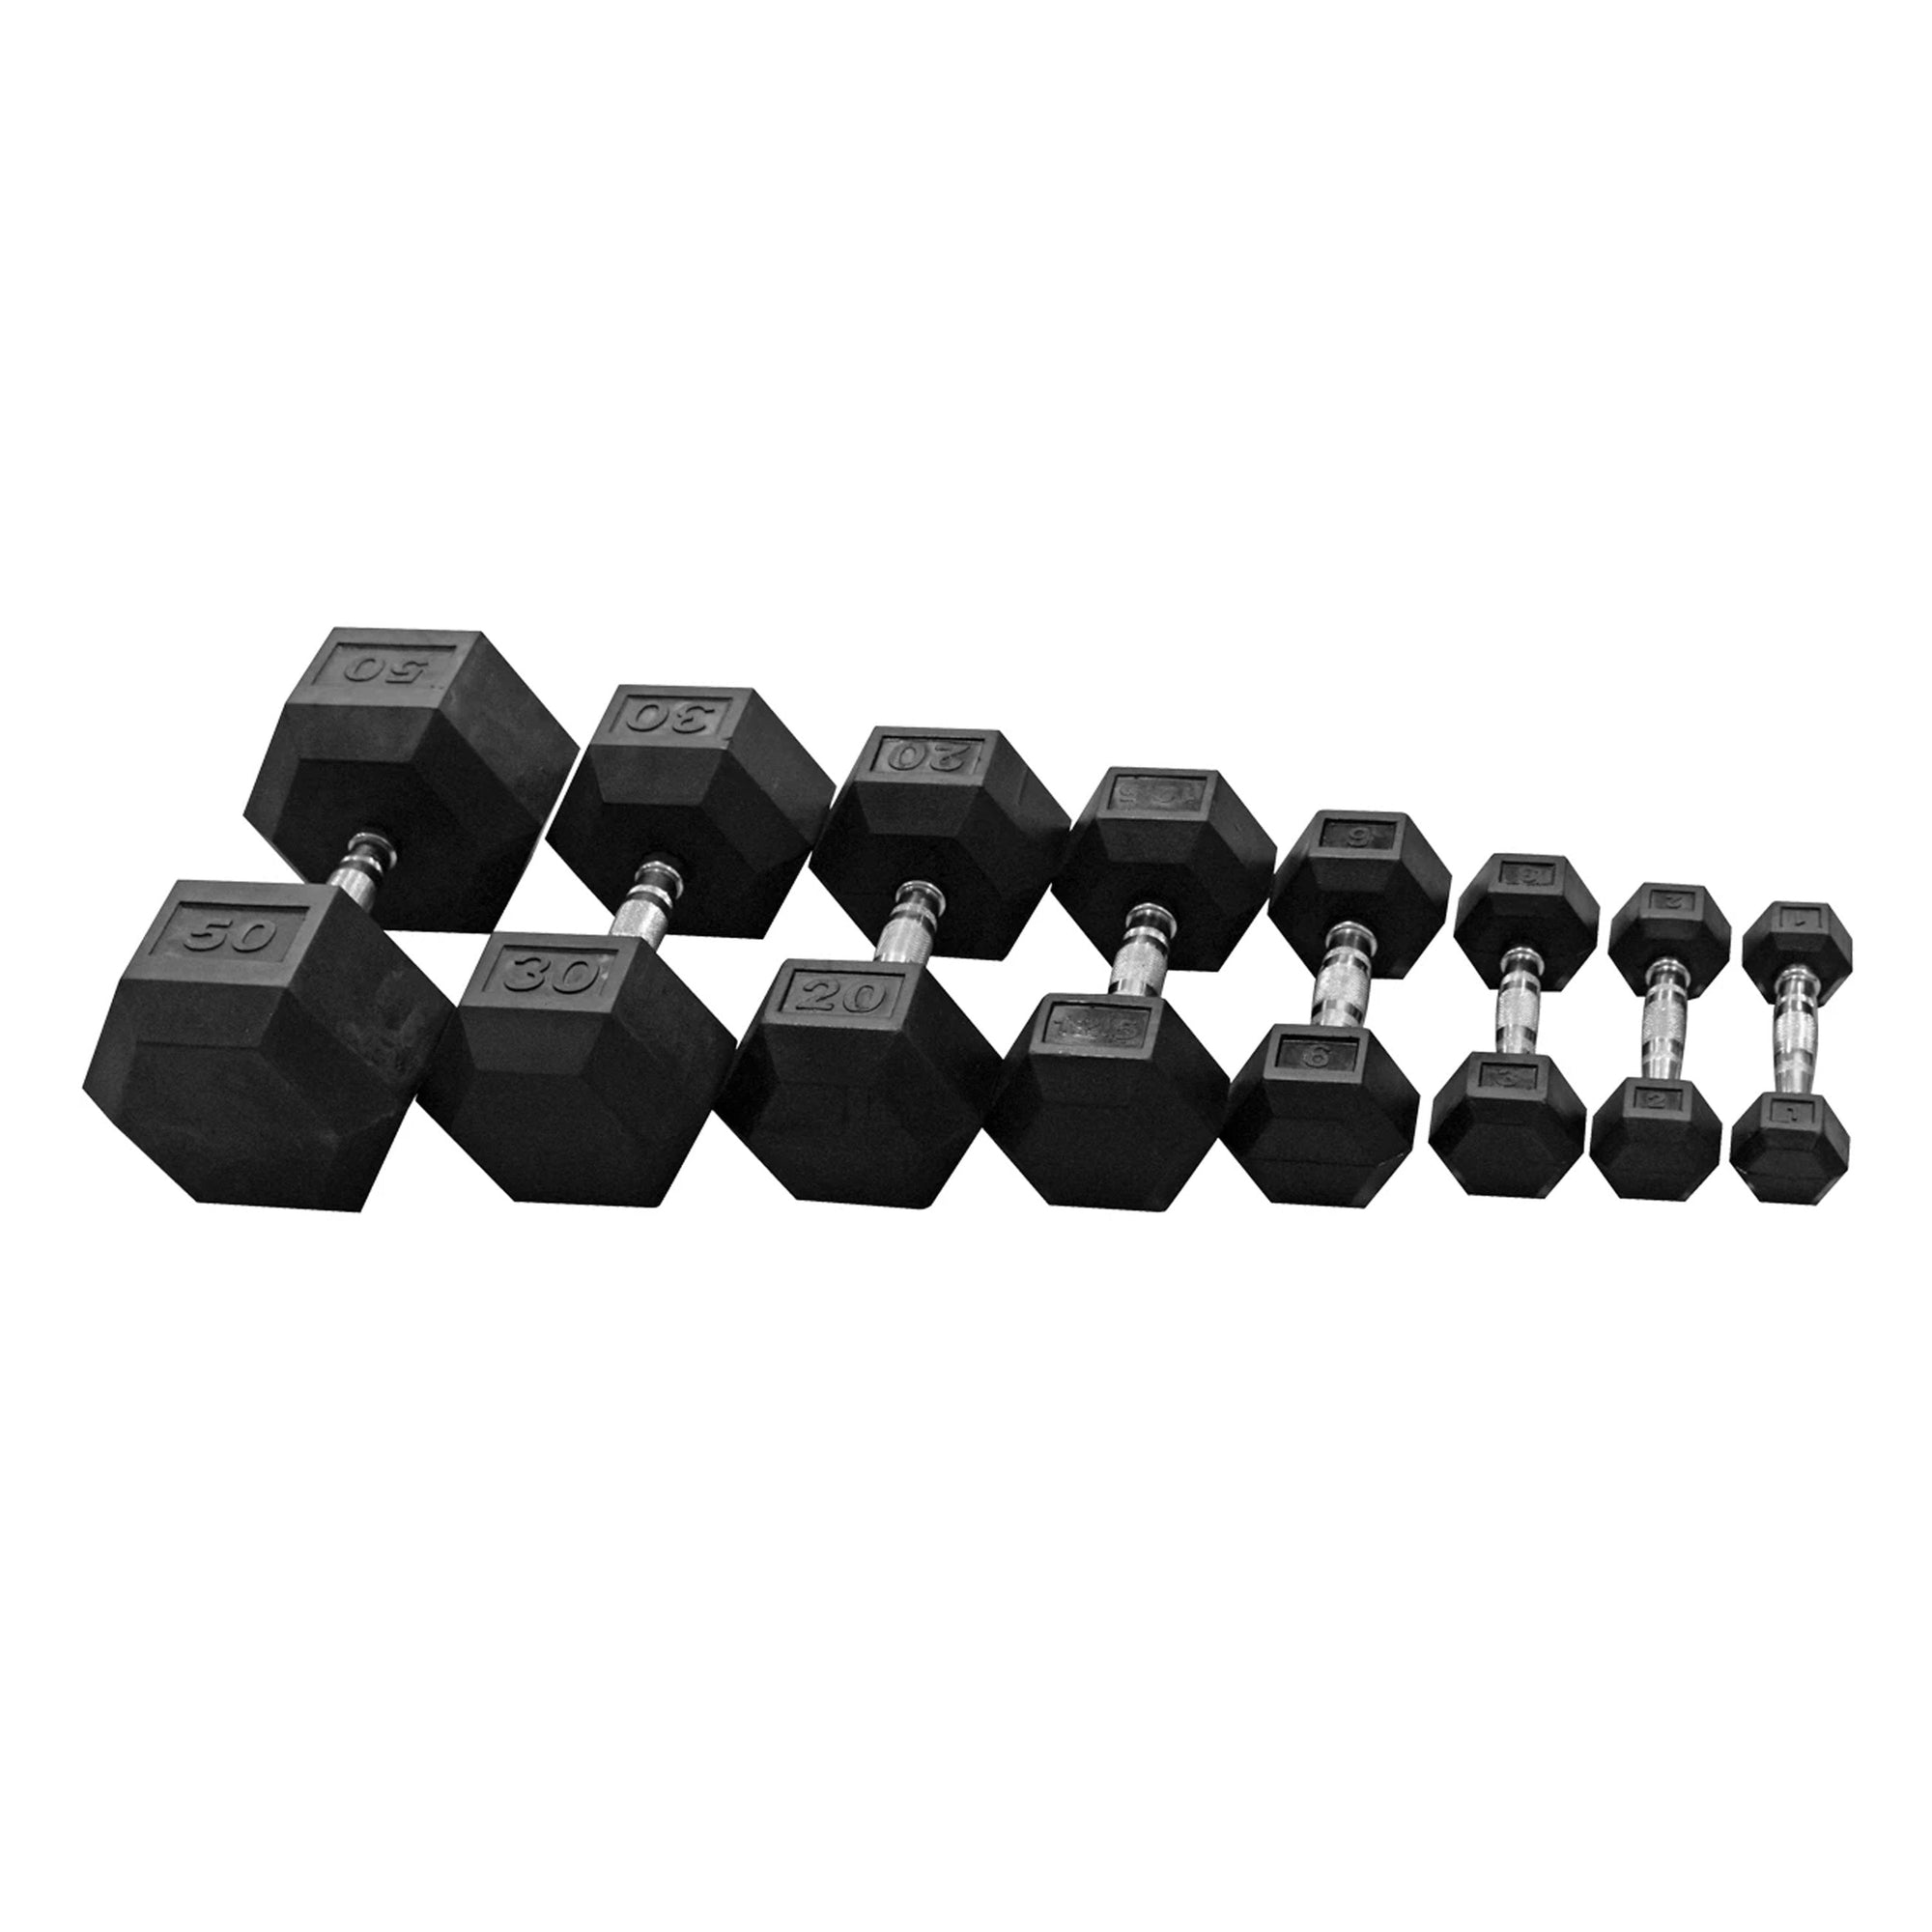 FitWay Equip. Rubber Hex Dumbbell Pair - 10lb